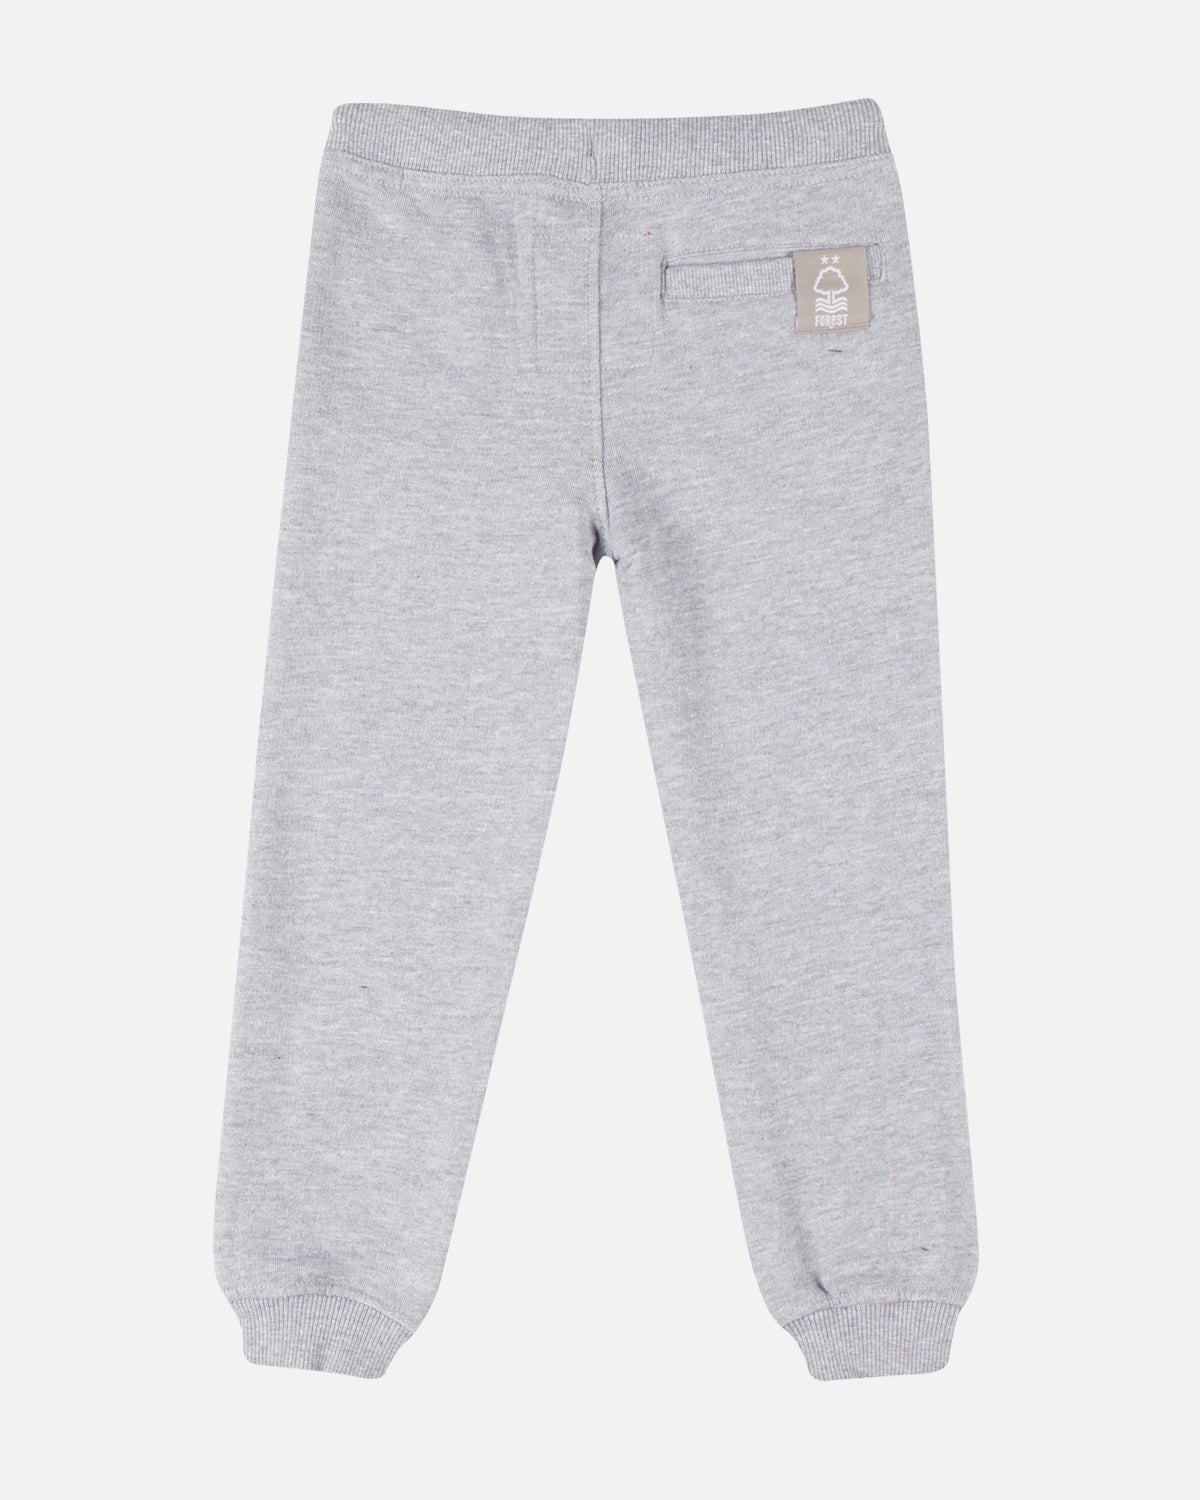 NFFC Womens Grey Marl Joggers - Nottingham Forest FC